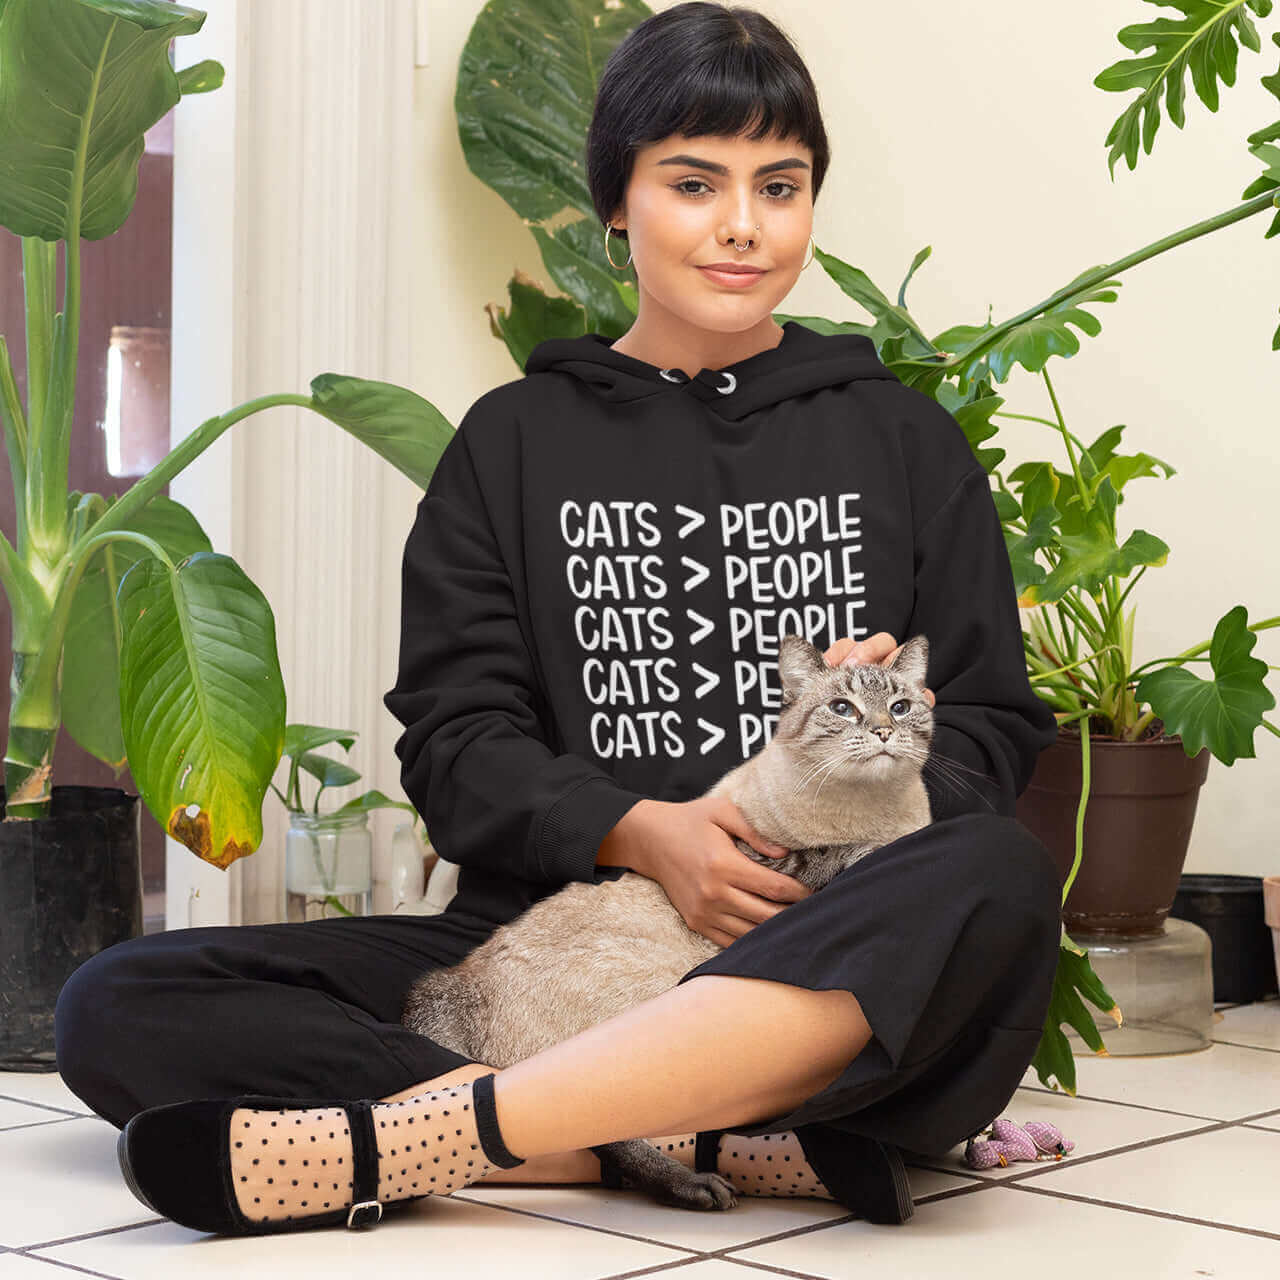 Woman petting a cat while wearing a black hooded sweatshirt with the words Cats > people printed on the front.